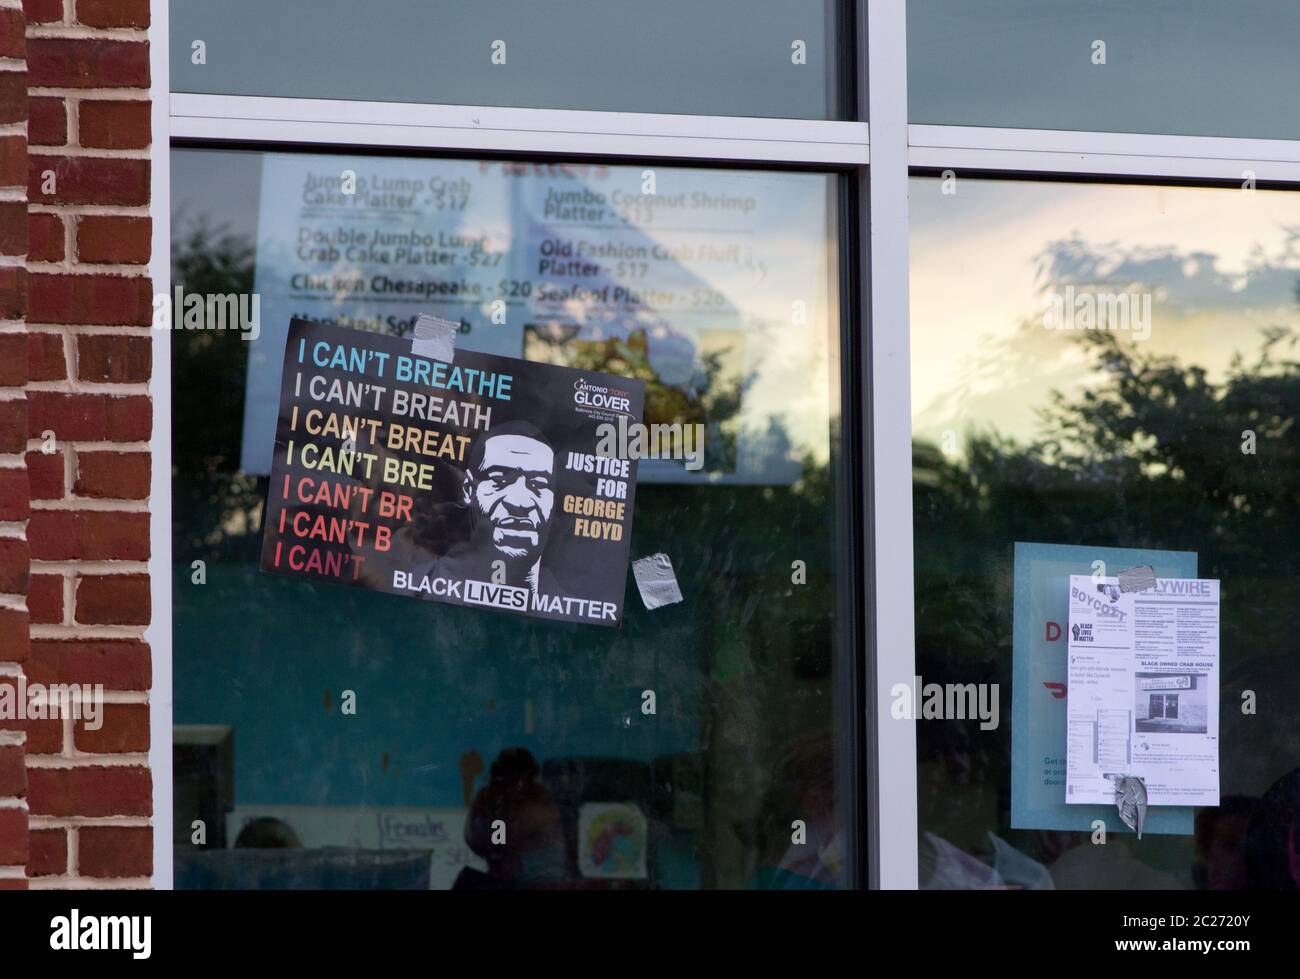 Middle River, Maryland, USA. 15th June, 2020. Antonio 'Tony' Glover Baltimore City Council District 13 Democratic Candidate Black Lives Matter Justice For George Floyd 'I Can't Breathe' placard taped on front window by a protester at the Middle River, Maryland, location of Vince's Crabhouse (Crab House), during a boycott and protest of the five-restaurant/seafood market chain over racially charged comments owner Vince Meyer made on the internet. A flyer of black-owned crab houses and Meyer's social media screenshots is below, the restaurant's menu visible through the window. Kay Howell/Alamy Stock Photo